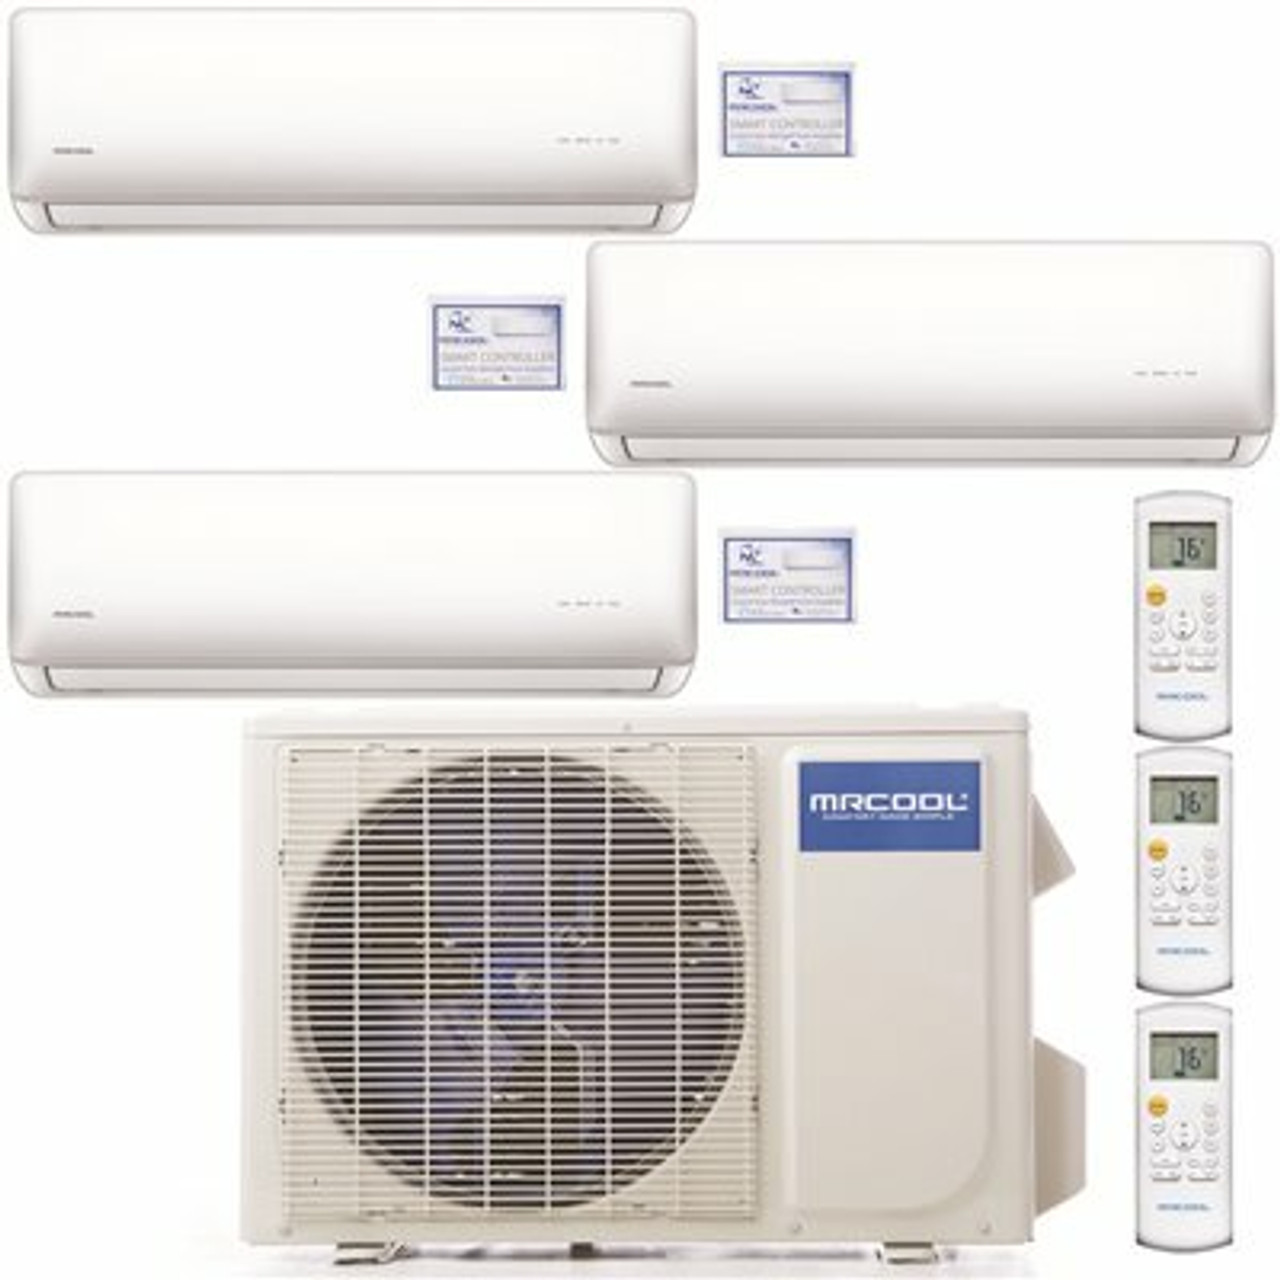 Mrcool Olympus 36,000 Btu 3 Ton 3-Zone Ductless Mini Split Air Conditioner And Heat Pump, 25 Ft. Install Kit - 230V/60Hz - 308810684